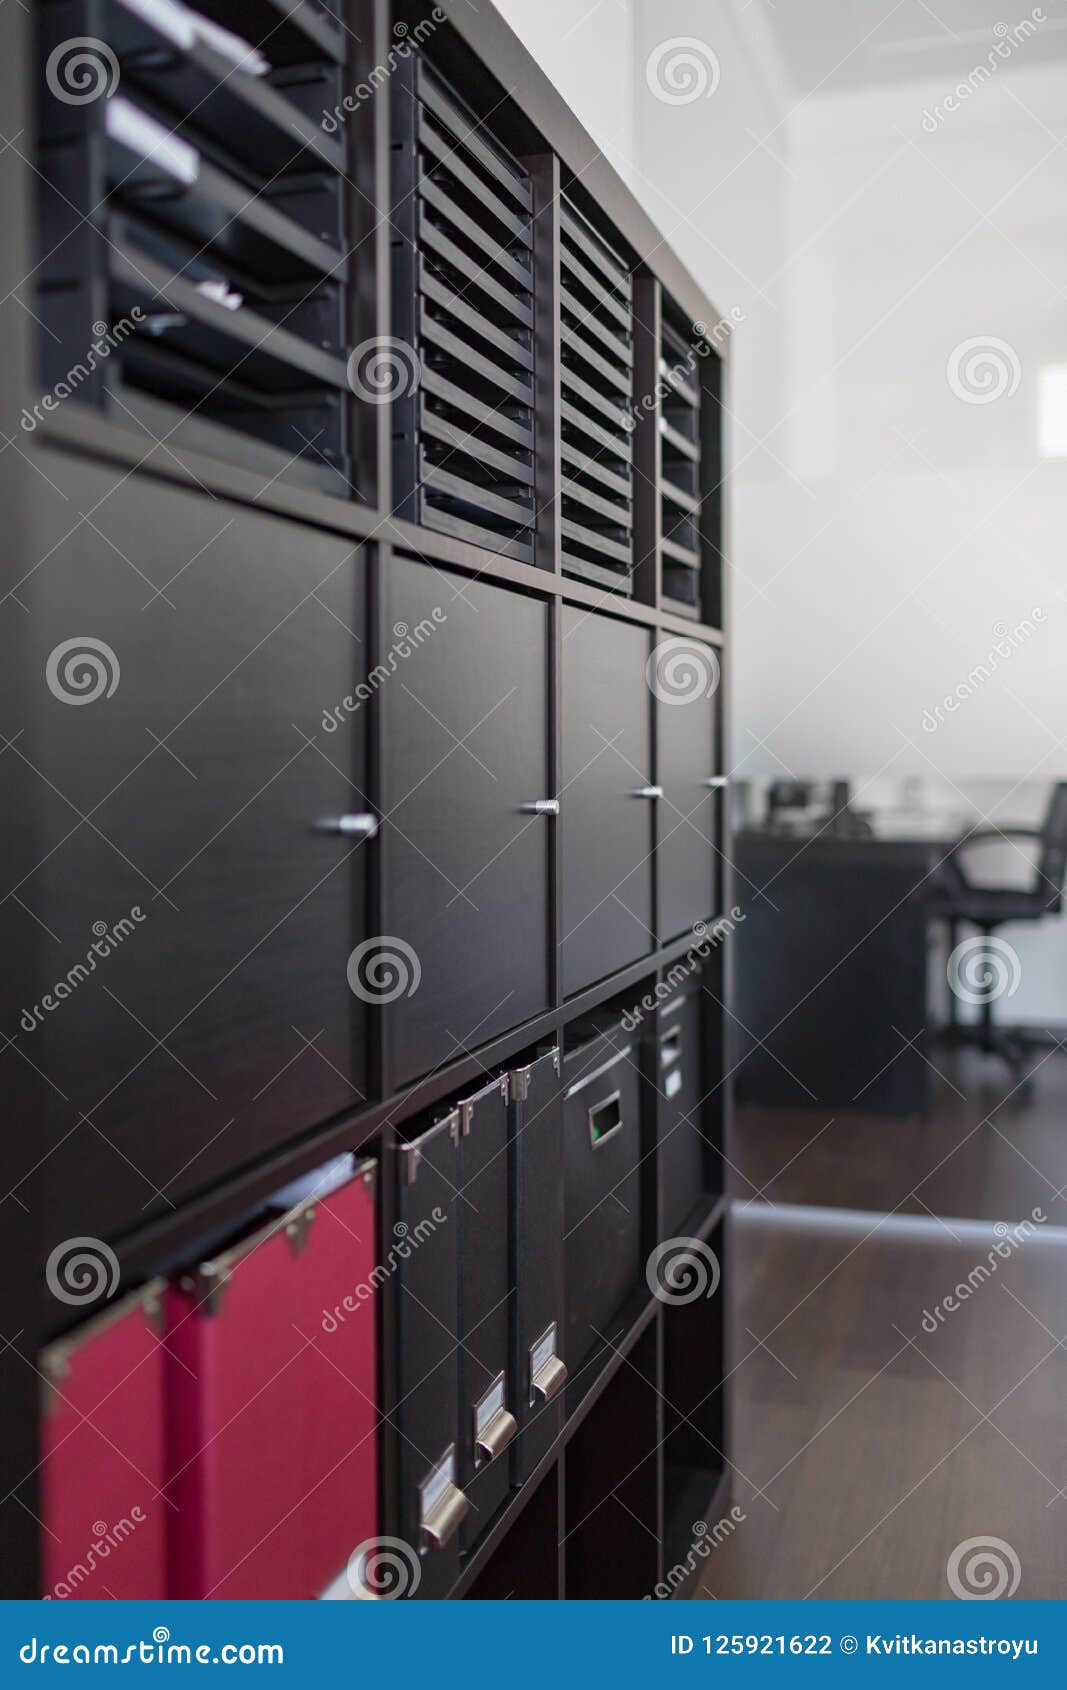 Red And Black Binders File Cabinets In Office Stock Photo Image